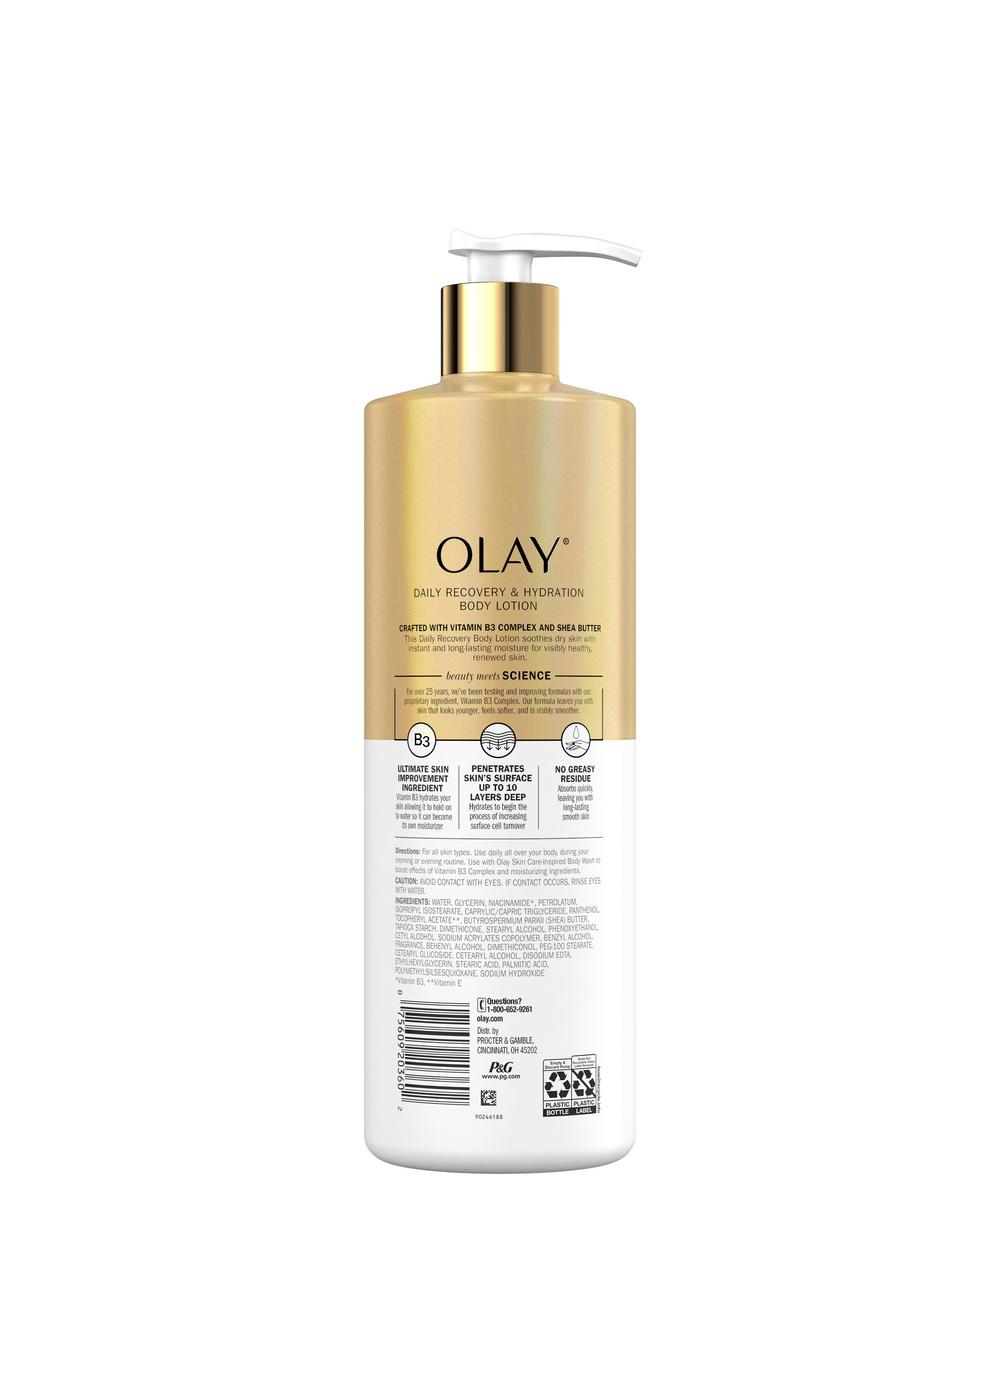 Olay Shea Butter Daily Recovery & Hydration Body Lotion; image 2 of 2